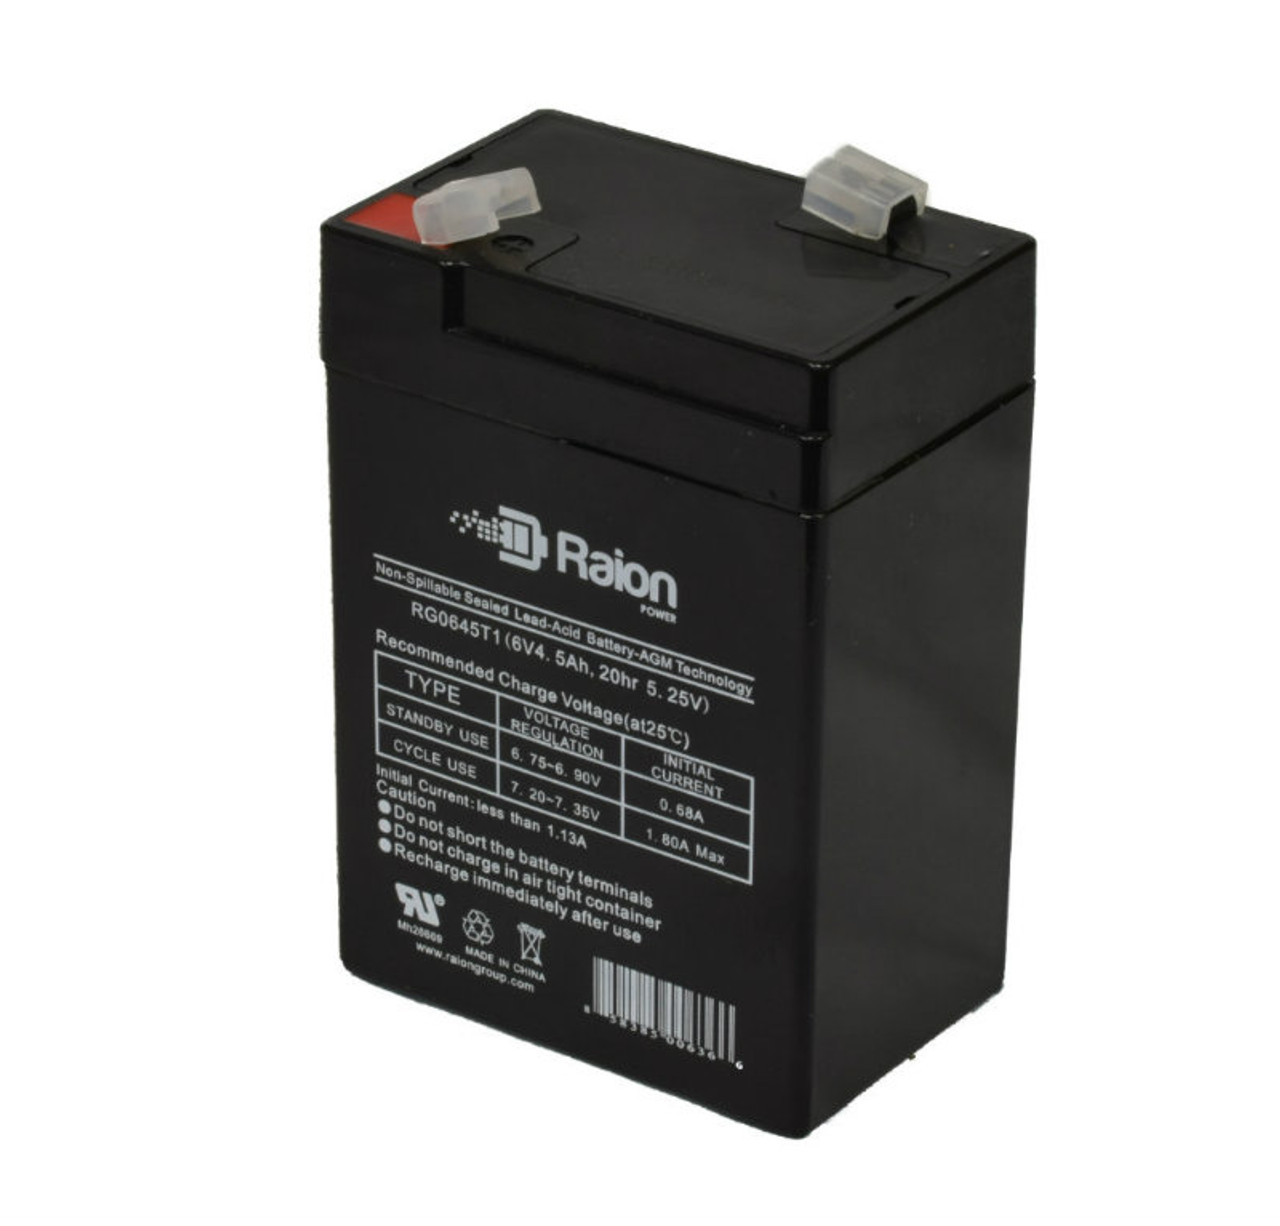 Raion Power RG0645T1 6V 4.5Ah Replacement Battery Cartridge for Green Cell AGM15